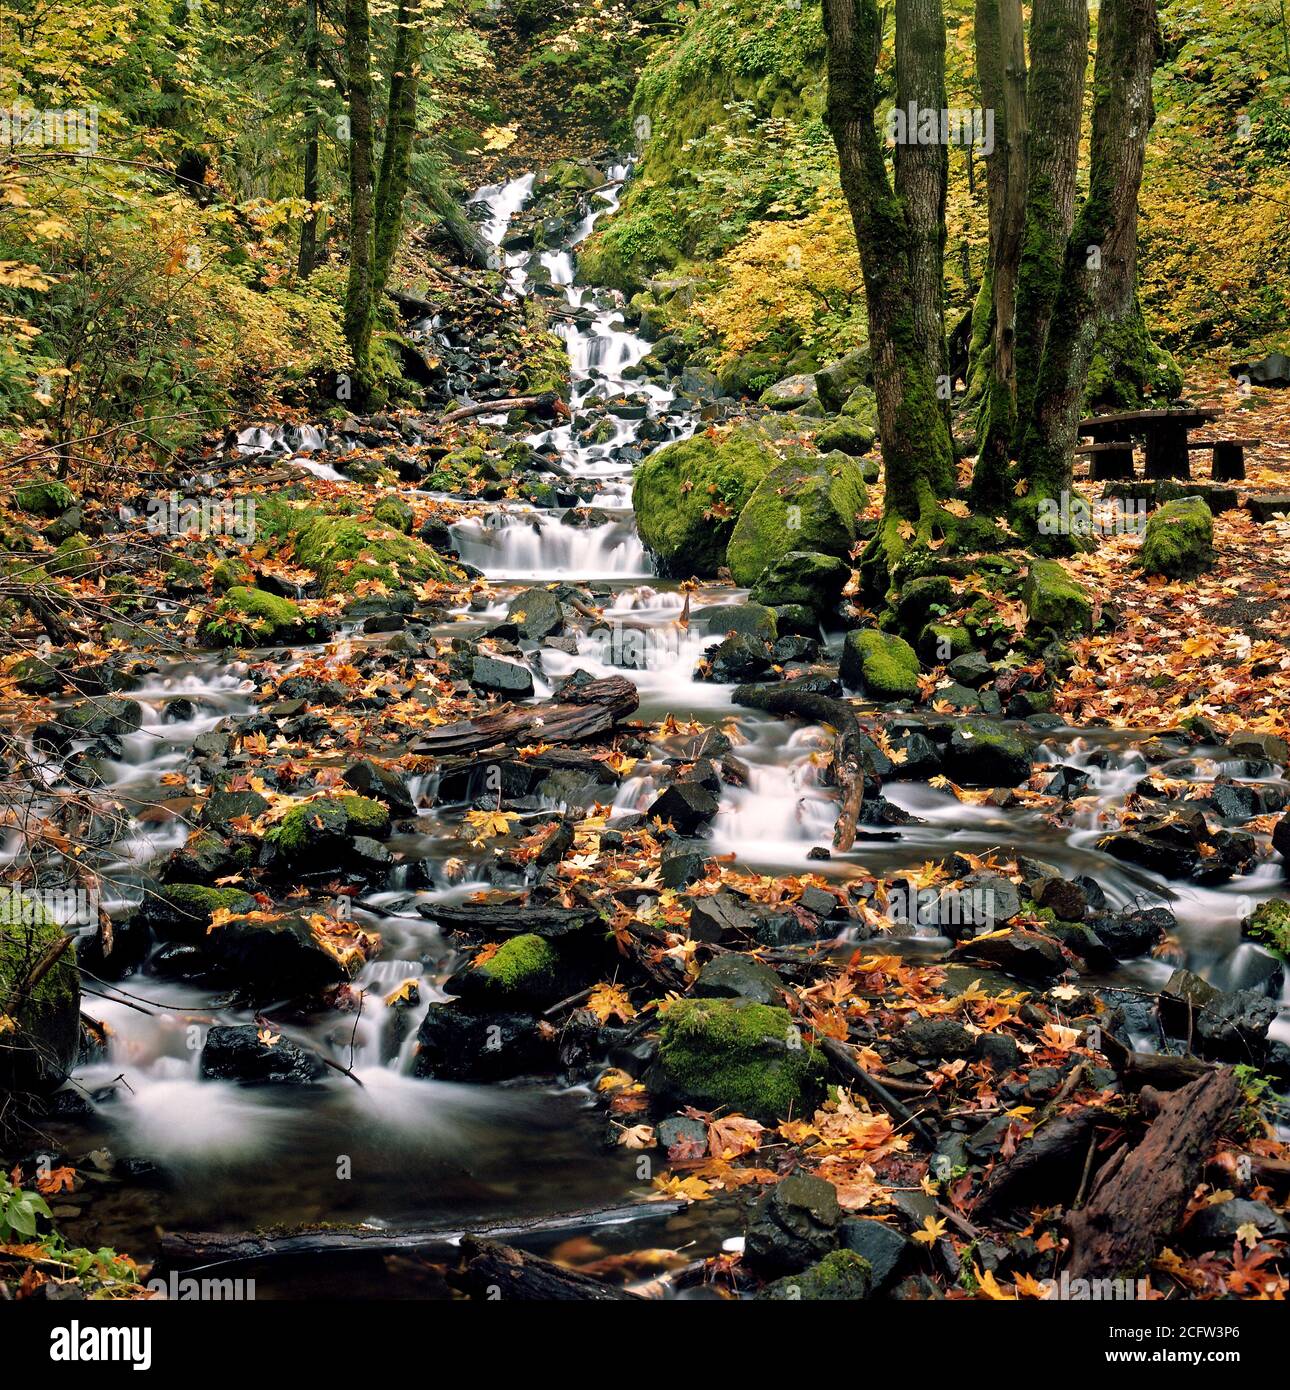 Starvation Creek Falls near Hood River in the Columbia Gorge, Oregon.  Fall is always an exciting time of year for a landscape photographer. Stock Photo